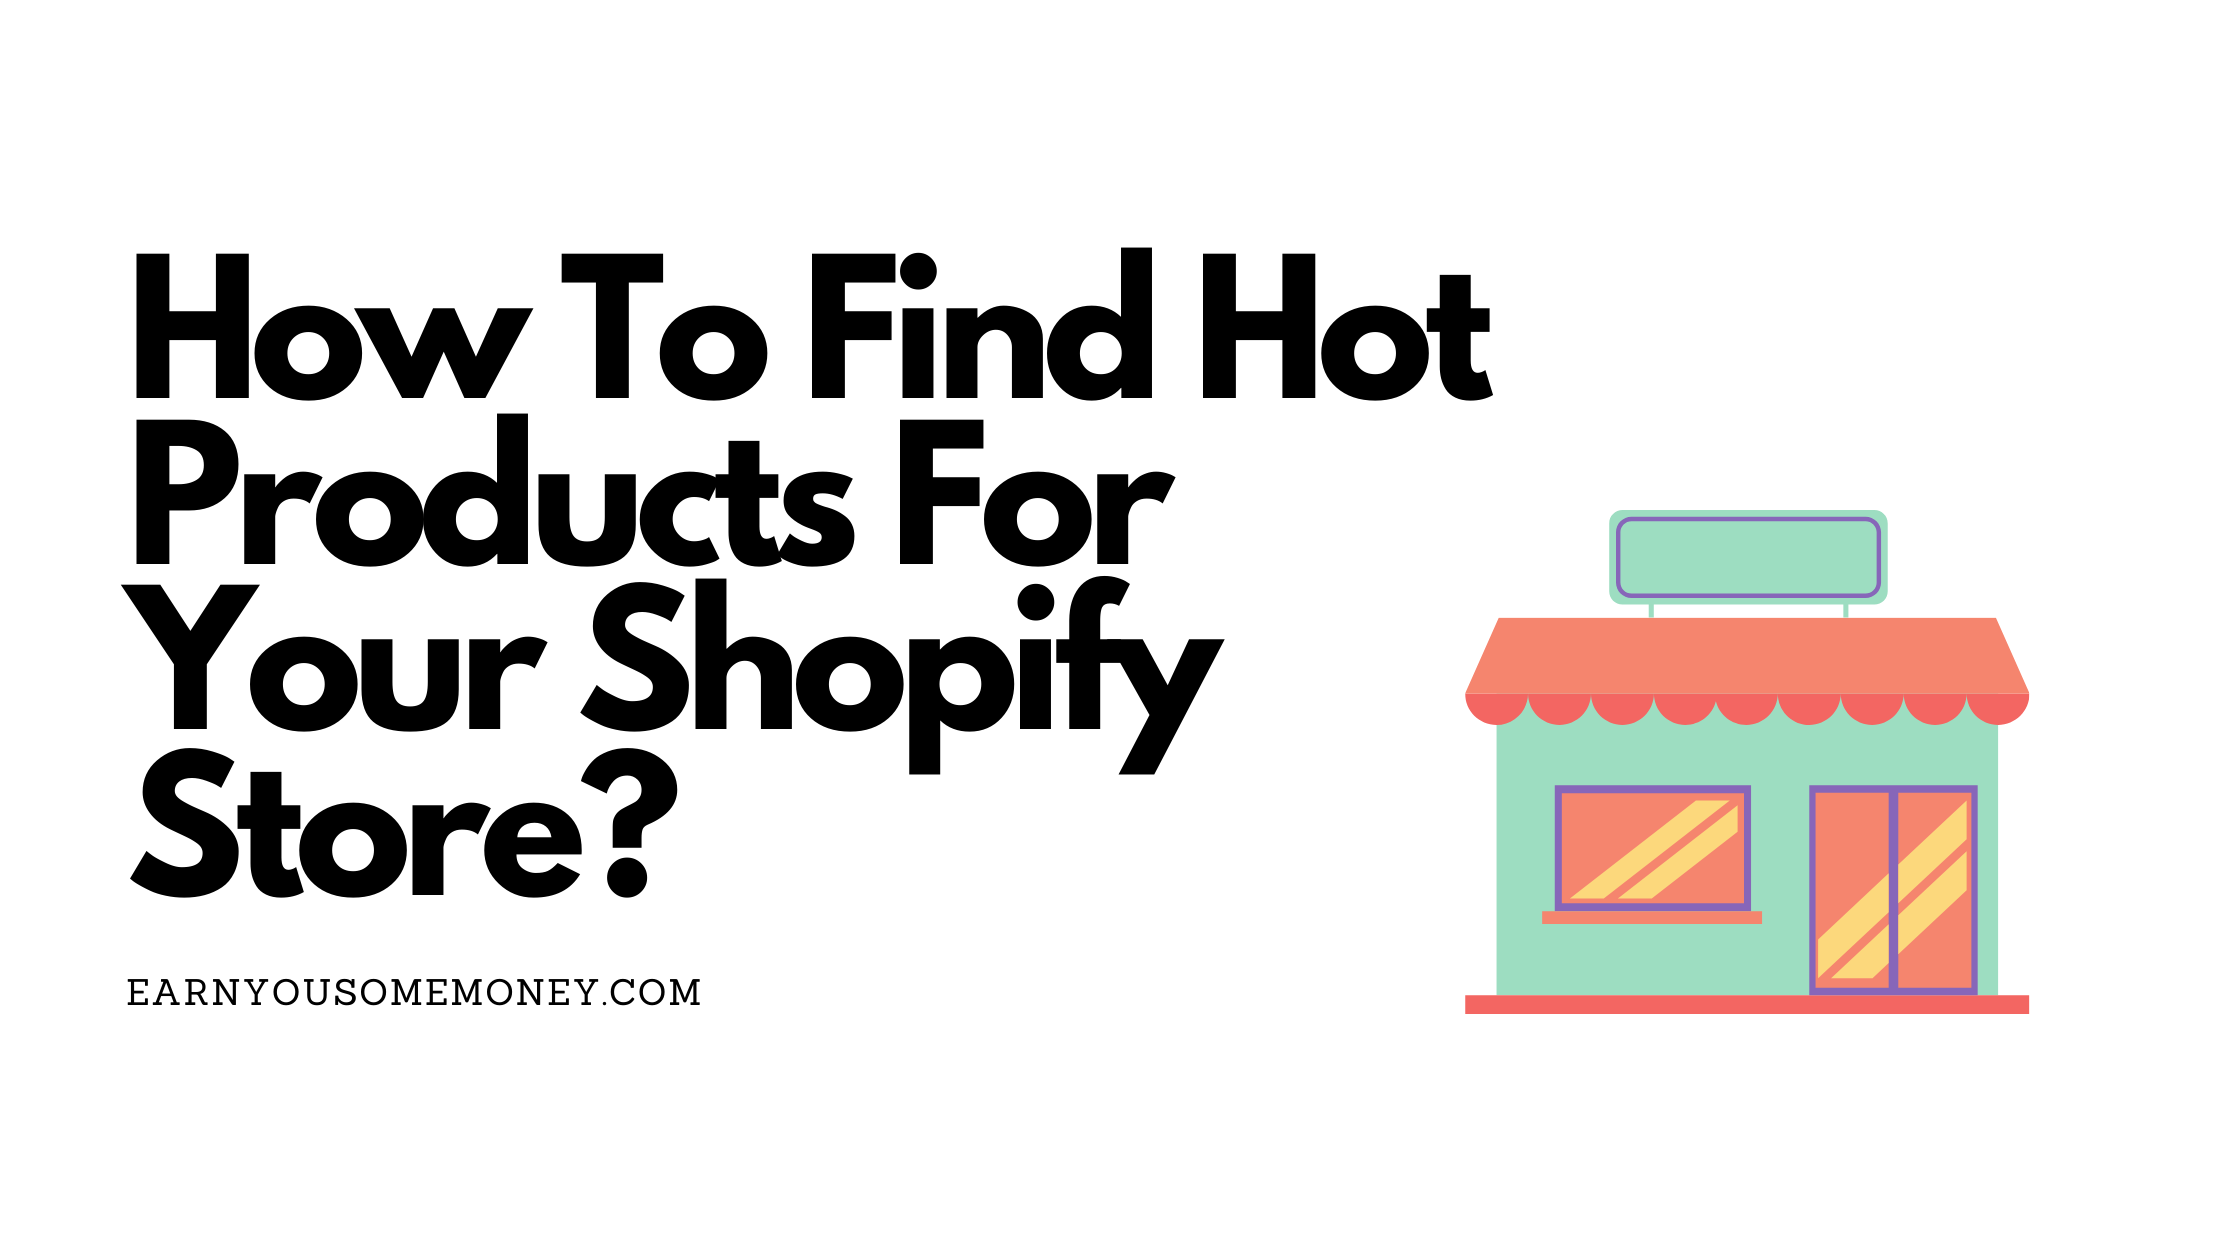 How To Find Hot Products For Your Shopify Store?